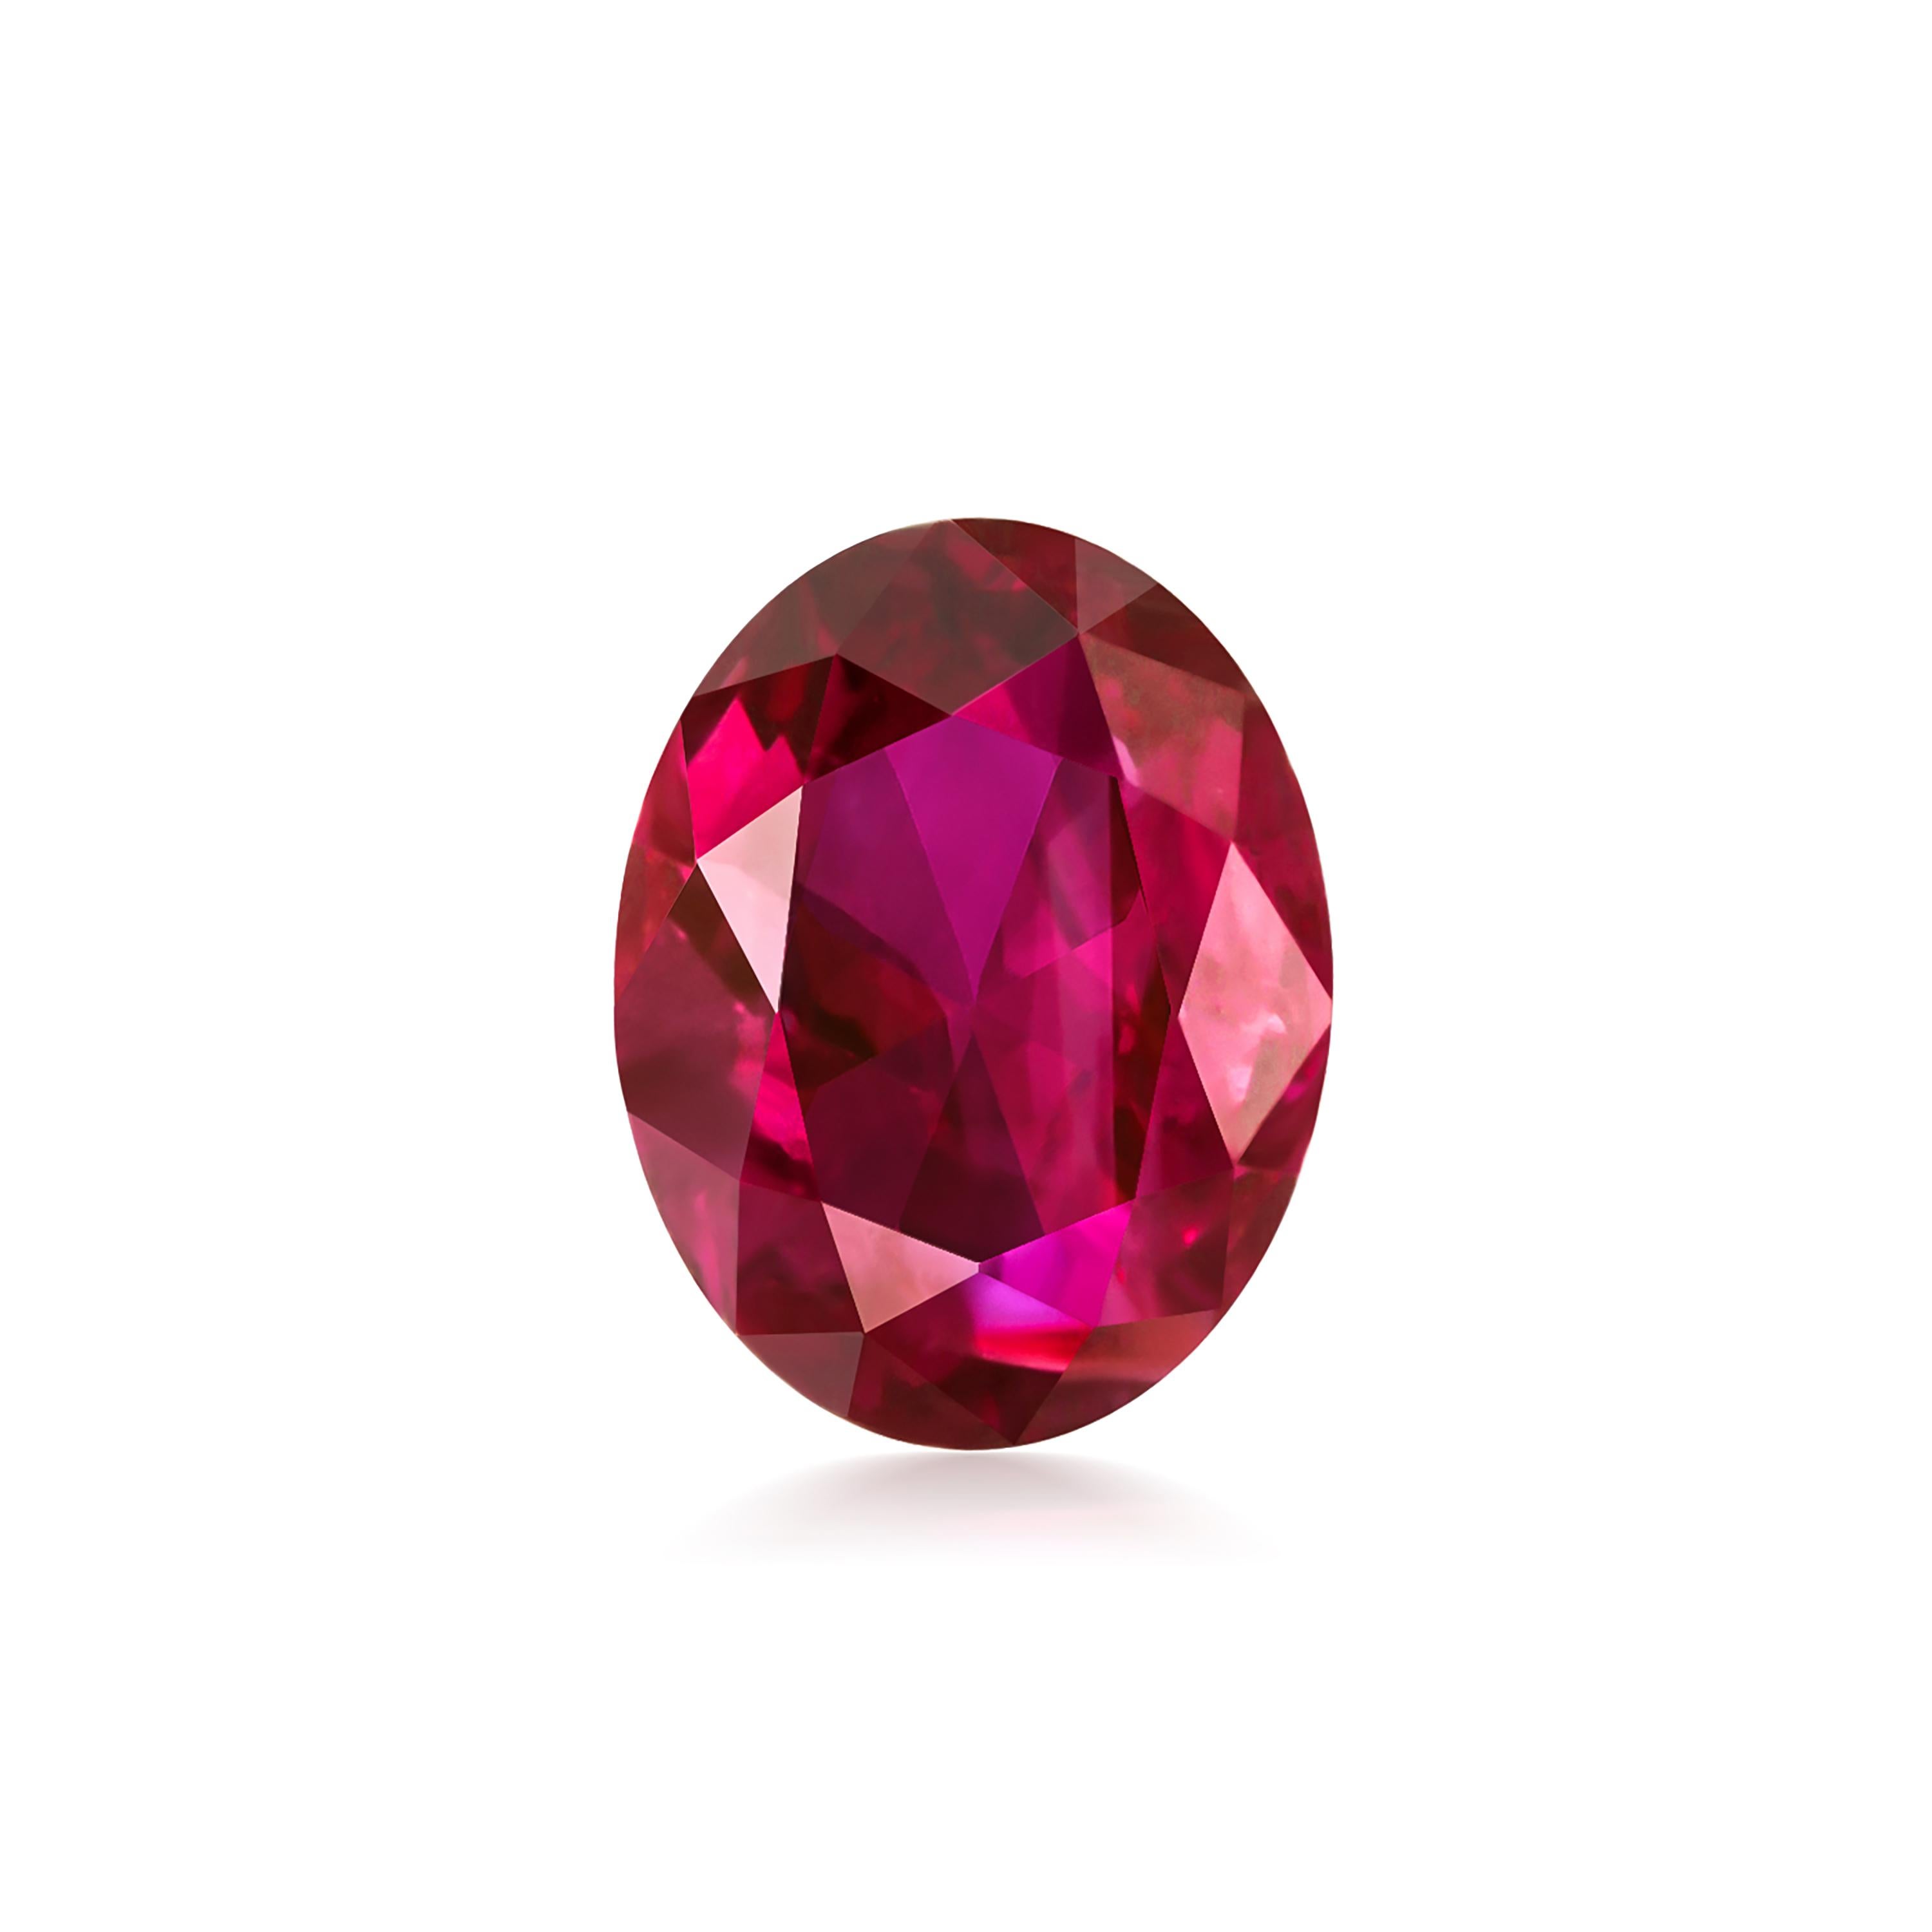 Contemporary GIA Certified Oval Ruby Natural Corundum Loose Stone Weighing 2.09 Carat Heated For Sale